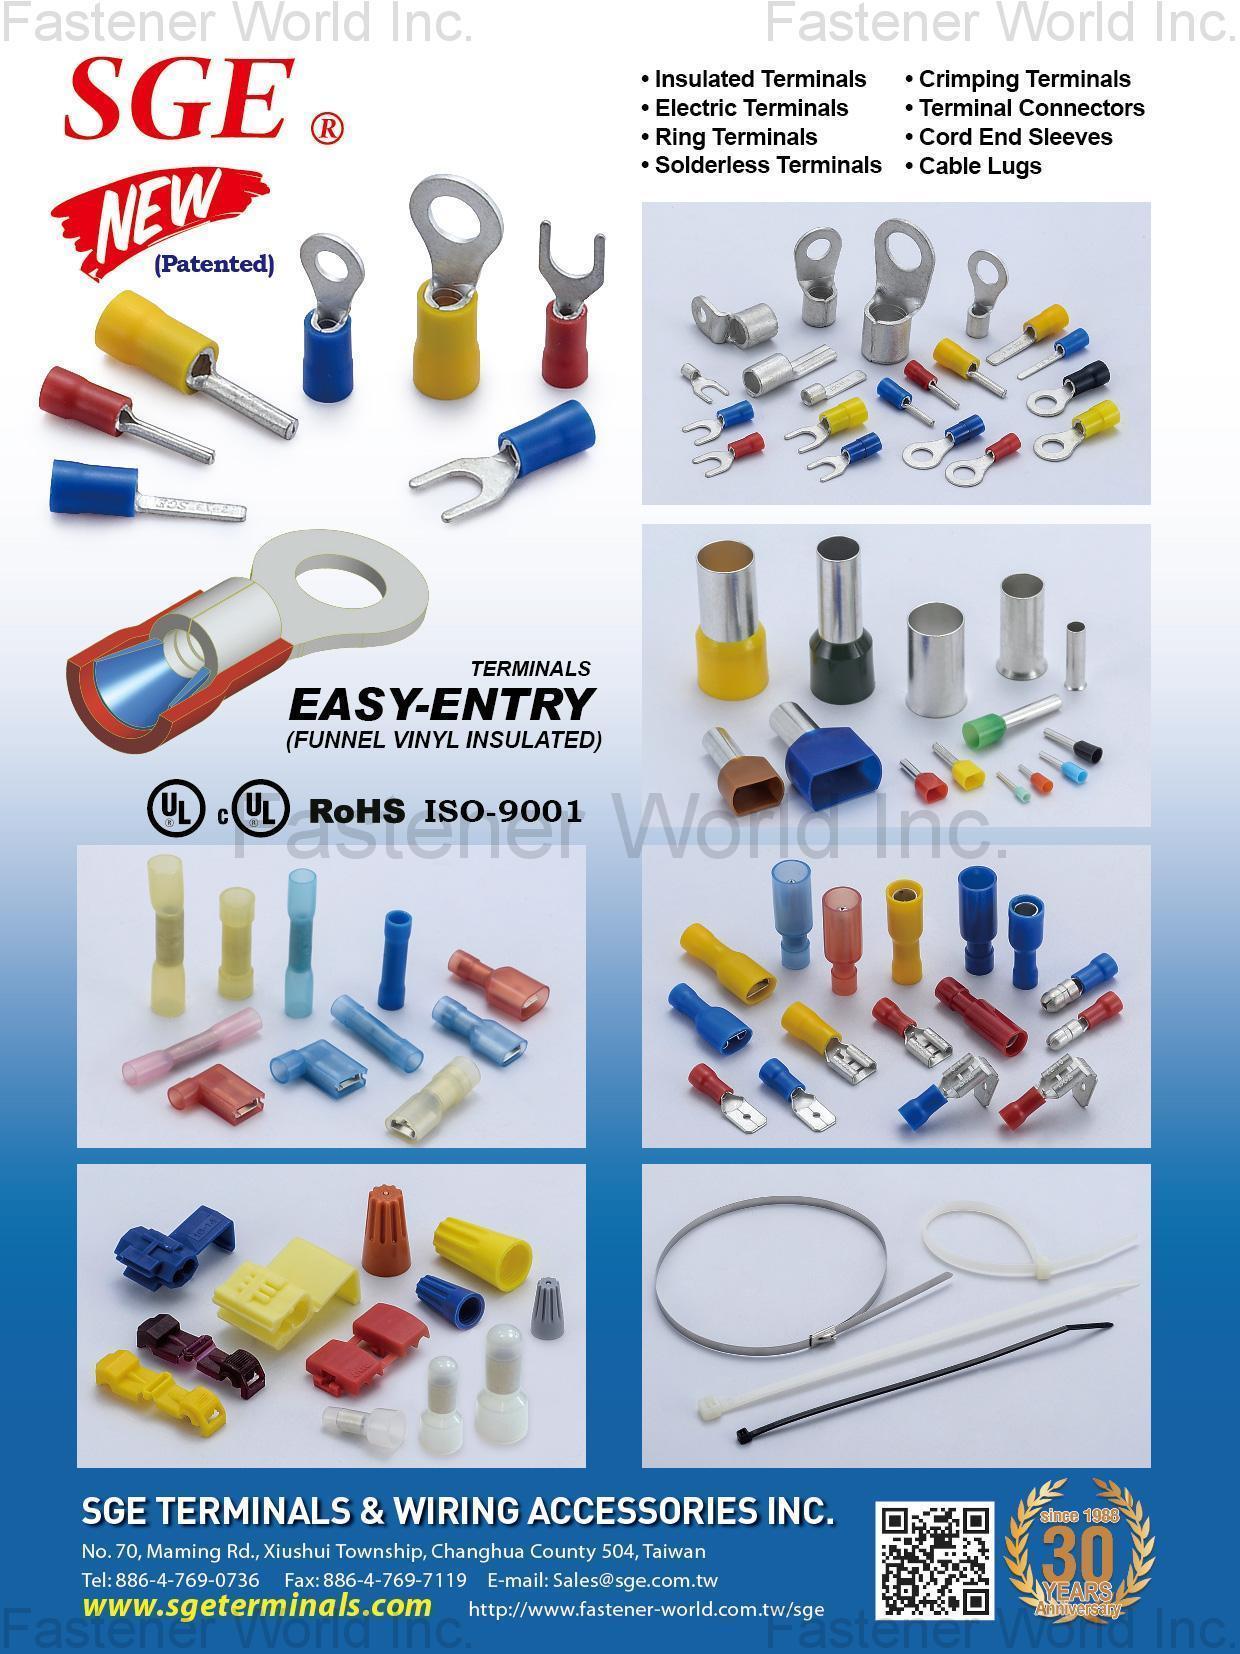 SGE TERMINALS & WIRING ACCESSORIES INC. , Insulated Terminals, Electric Terminals, Ring Terminals, Solderless Terminals, Crimping Terminals, Terminal Connectors, Cord End Sleeves, Cable Lugs , Cable Ties